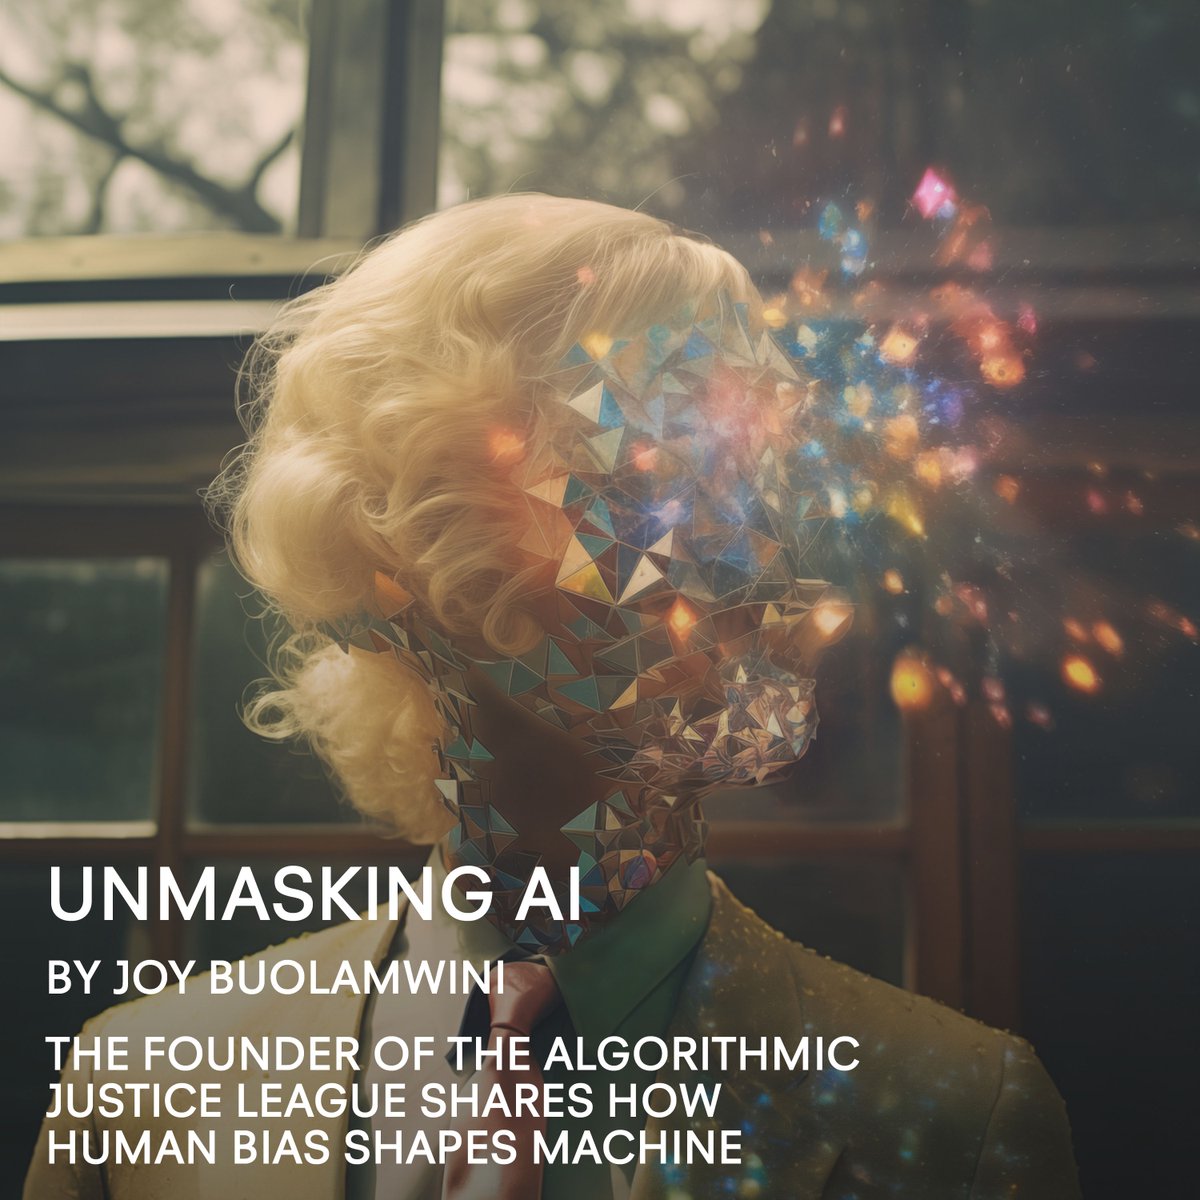 Can AI be free of prejudice? In “Unmasking AI,” the founder of the Algorithmic Justice League, Dr. Joy Buolamwini, shares how human bias shapes machine learning. Read the article featured in #SpiralMagazine now: rubinmuseum.org/spiral/unmaski… 🖌️K. Whiteford